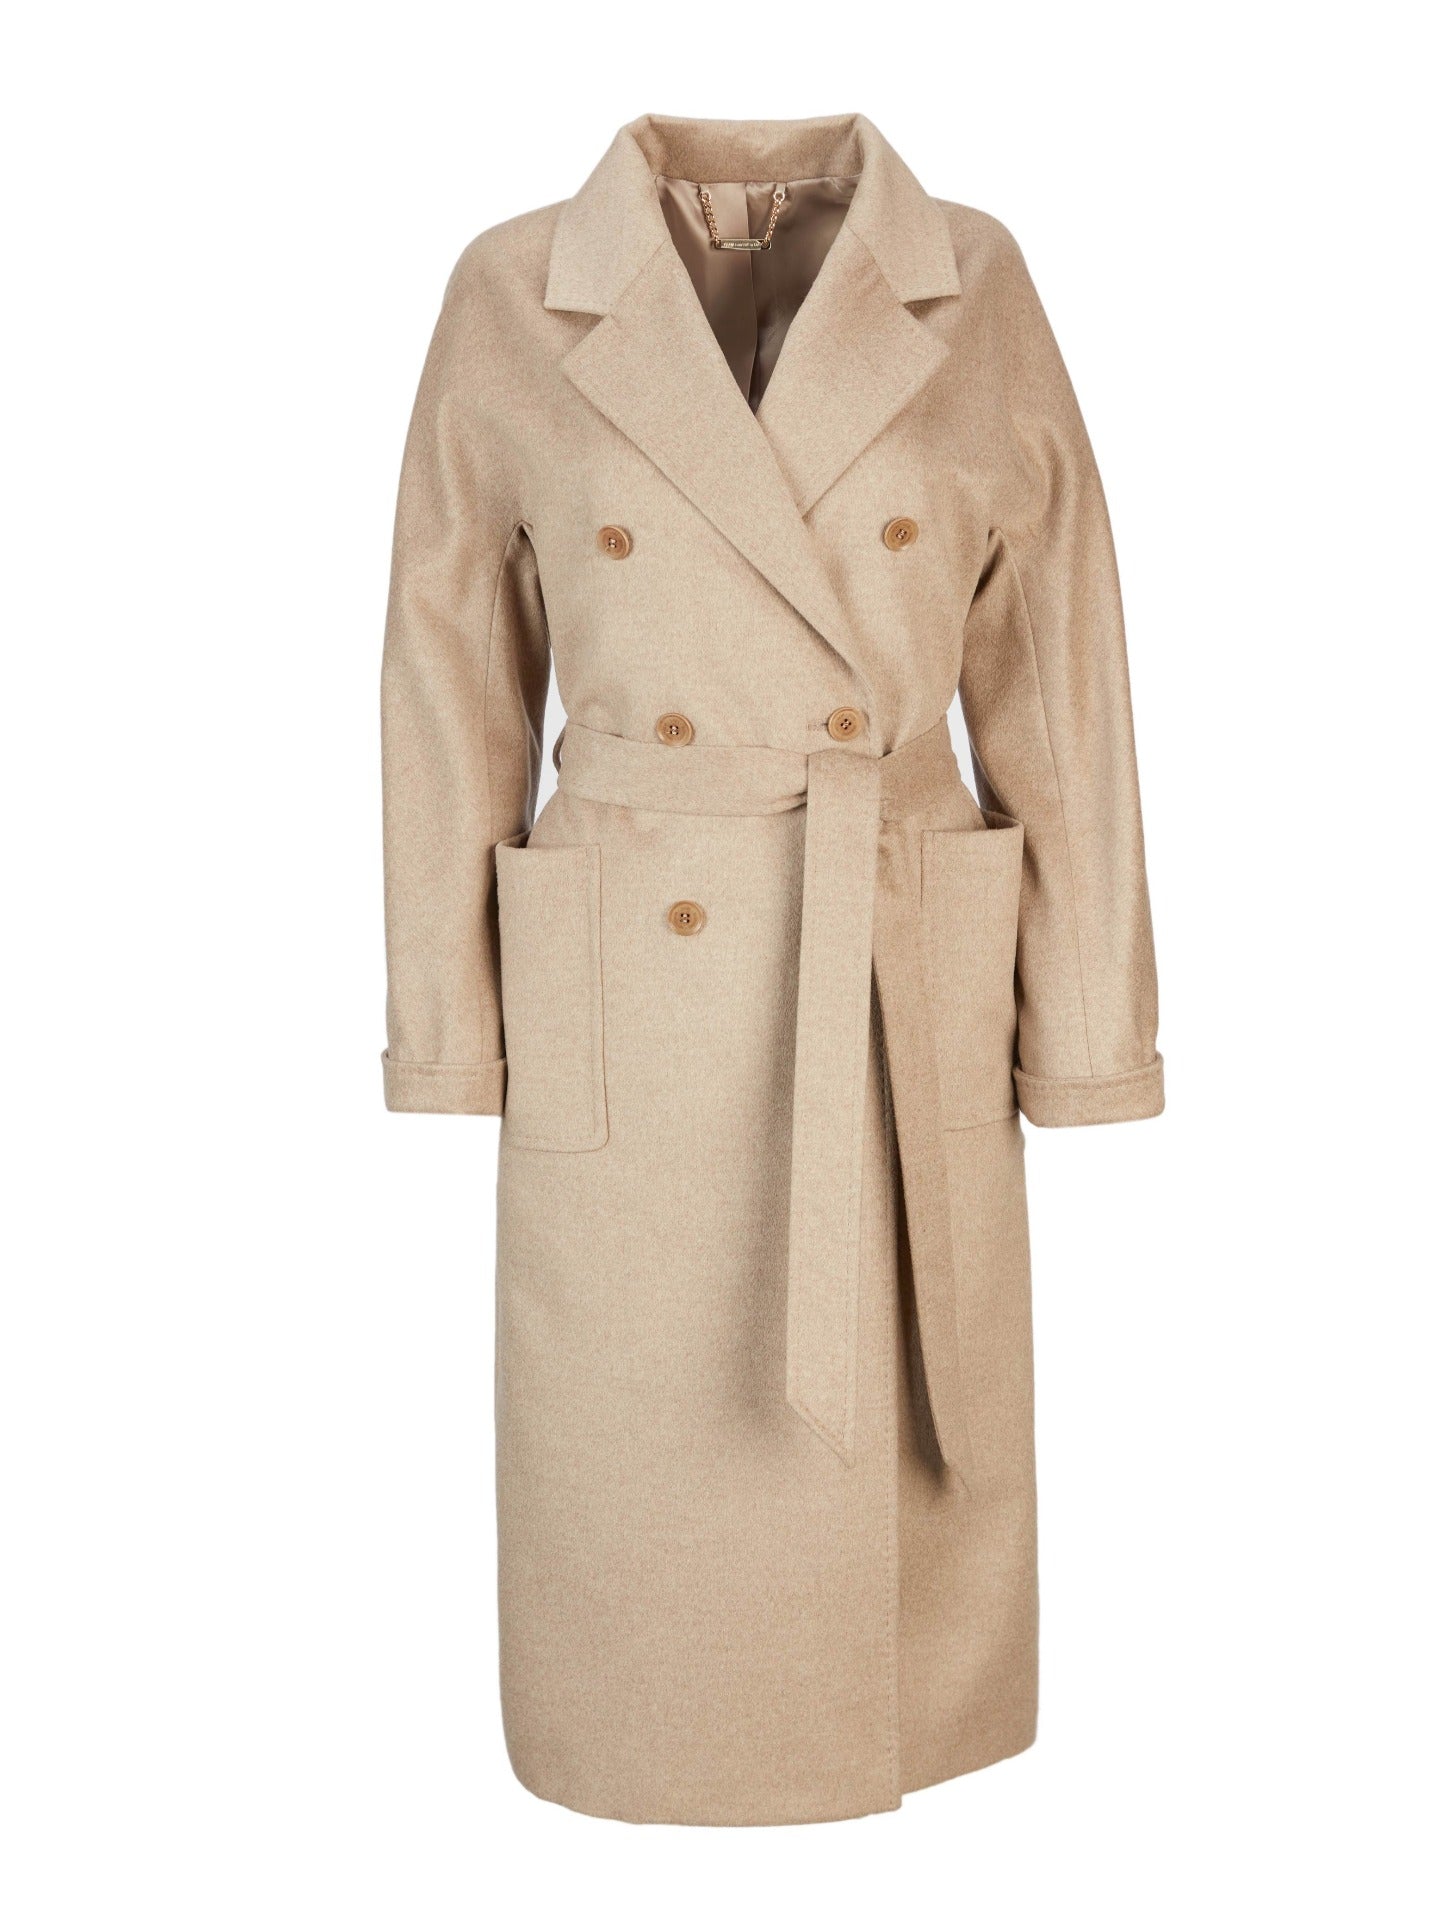 Women's Cashmere Double-Breasted Long Coat Taupe - Gobi Cashmere